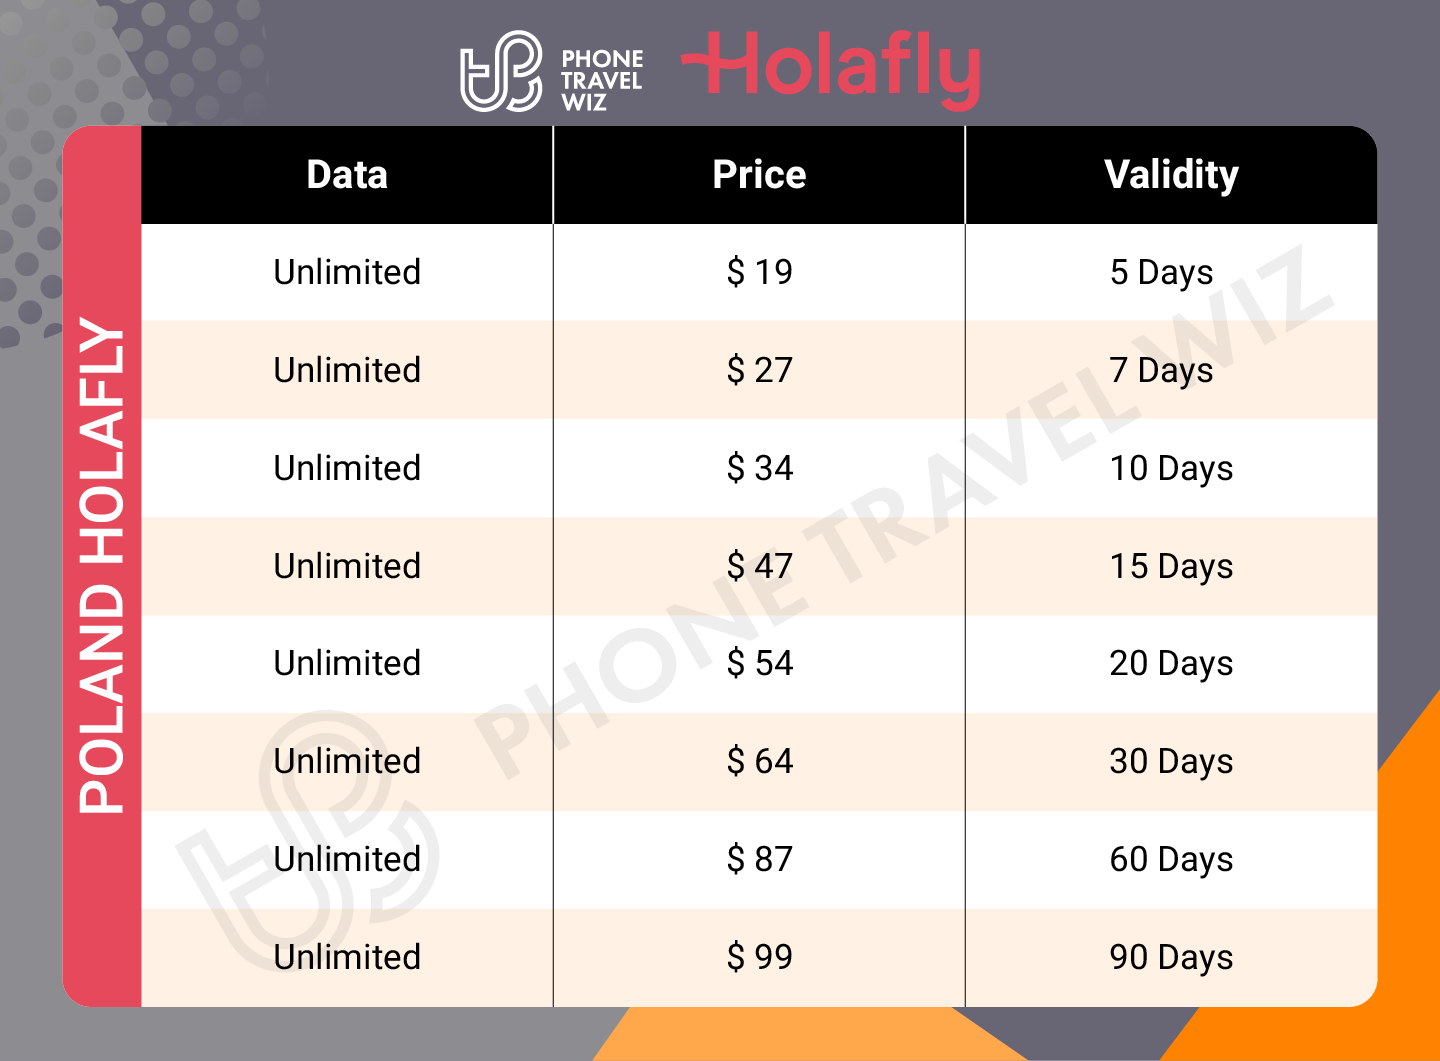 Holafly Poland eSIM Price & Data Details Infographic by Phone Travel Wiz